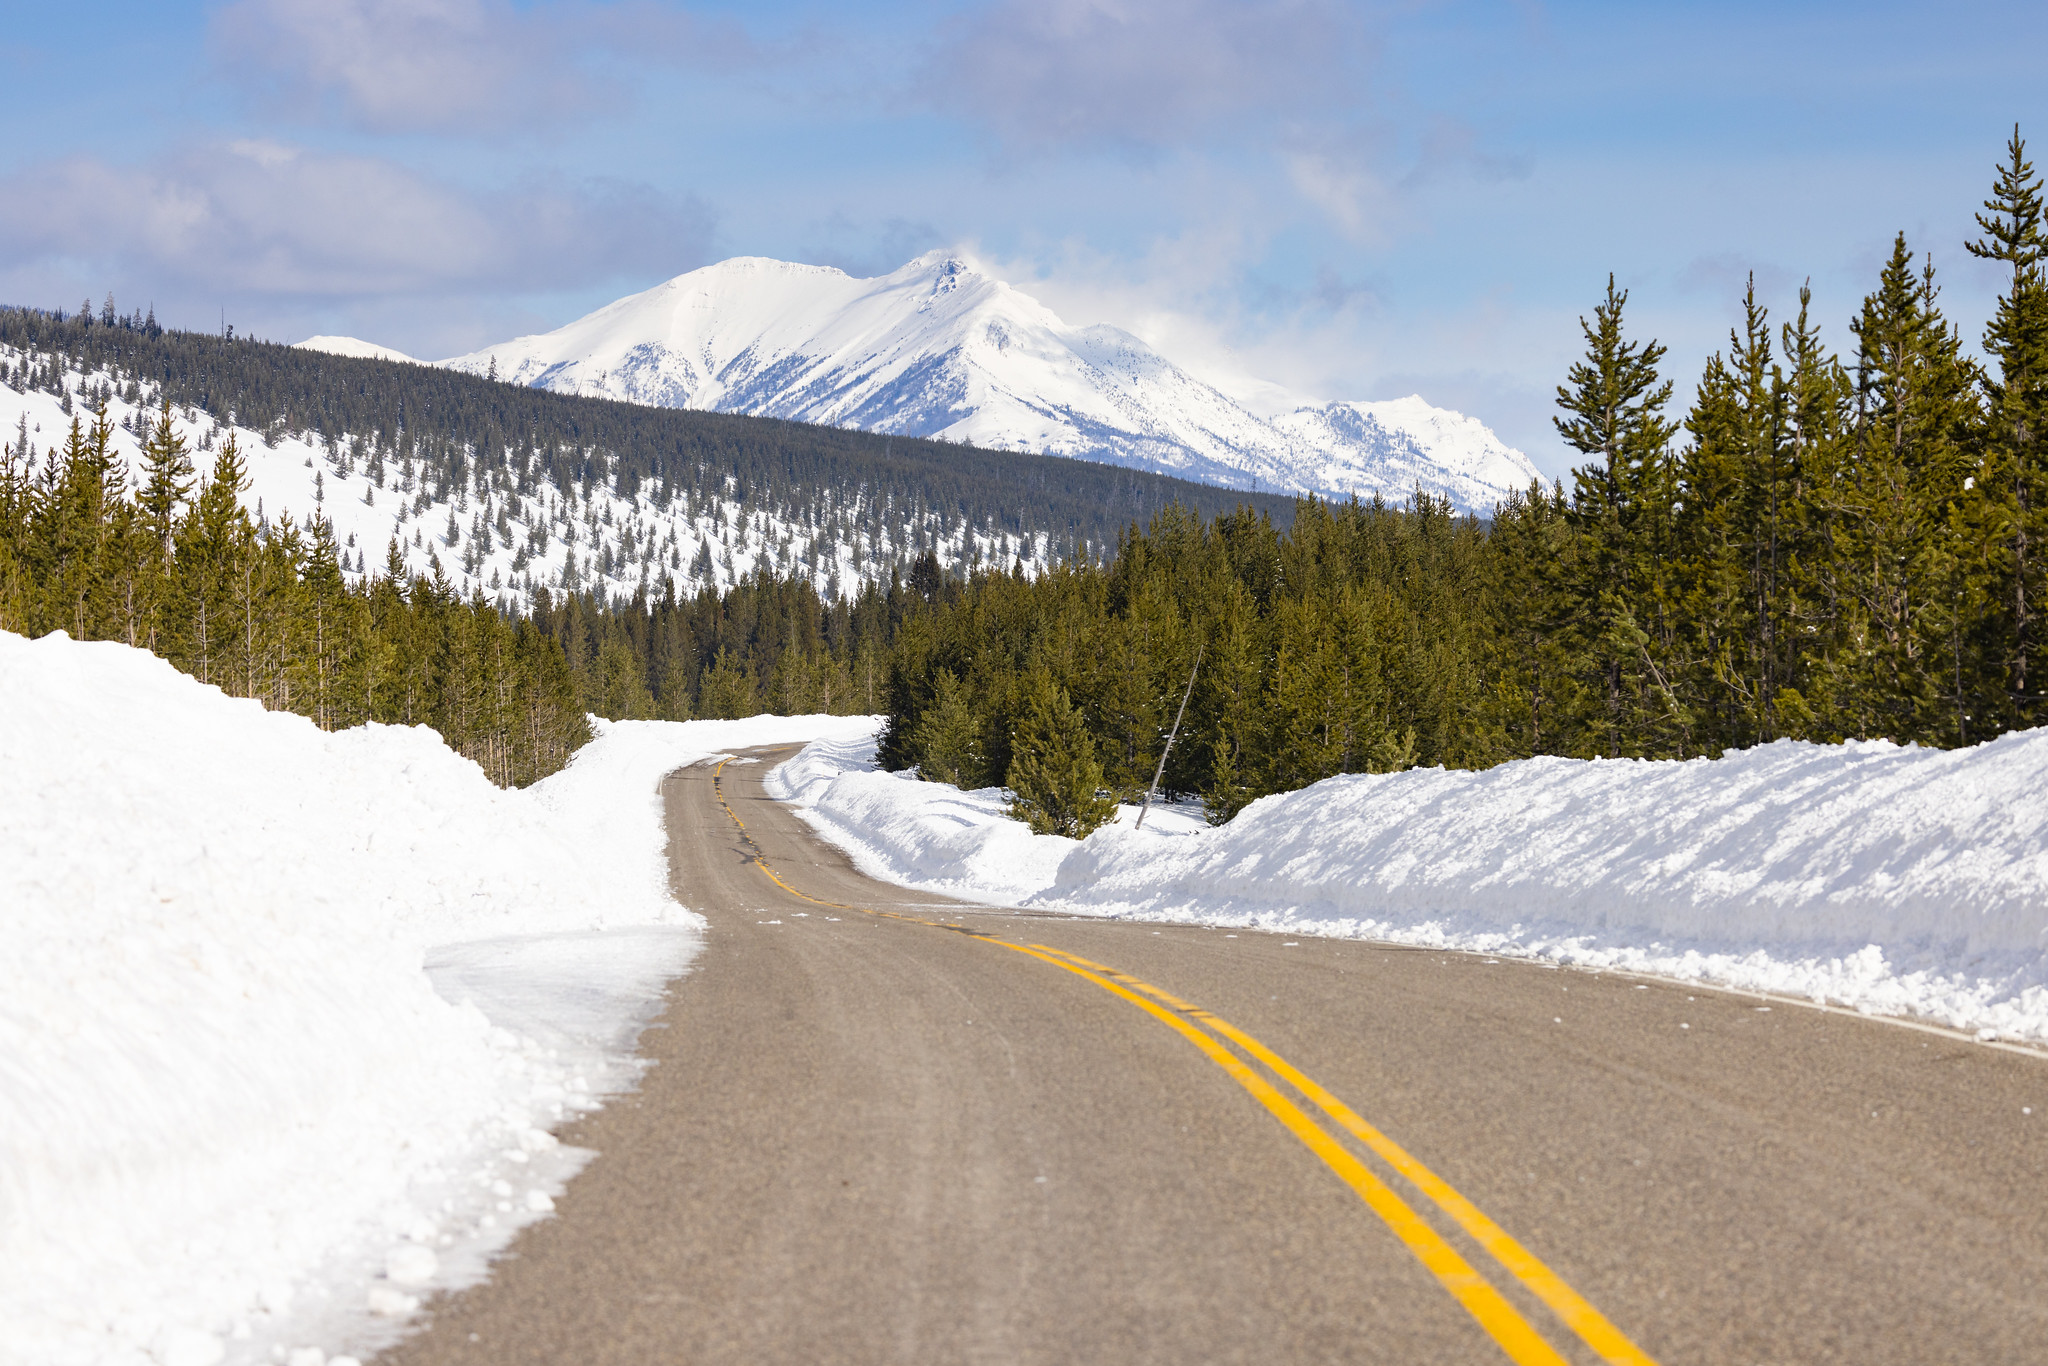 Spring biking road conditions 2023: tall snow banks